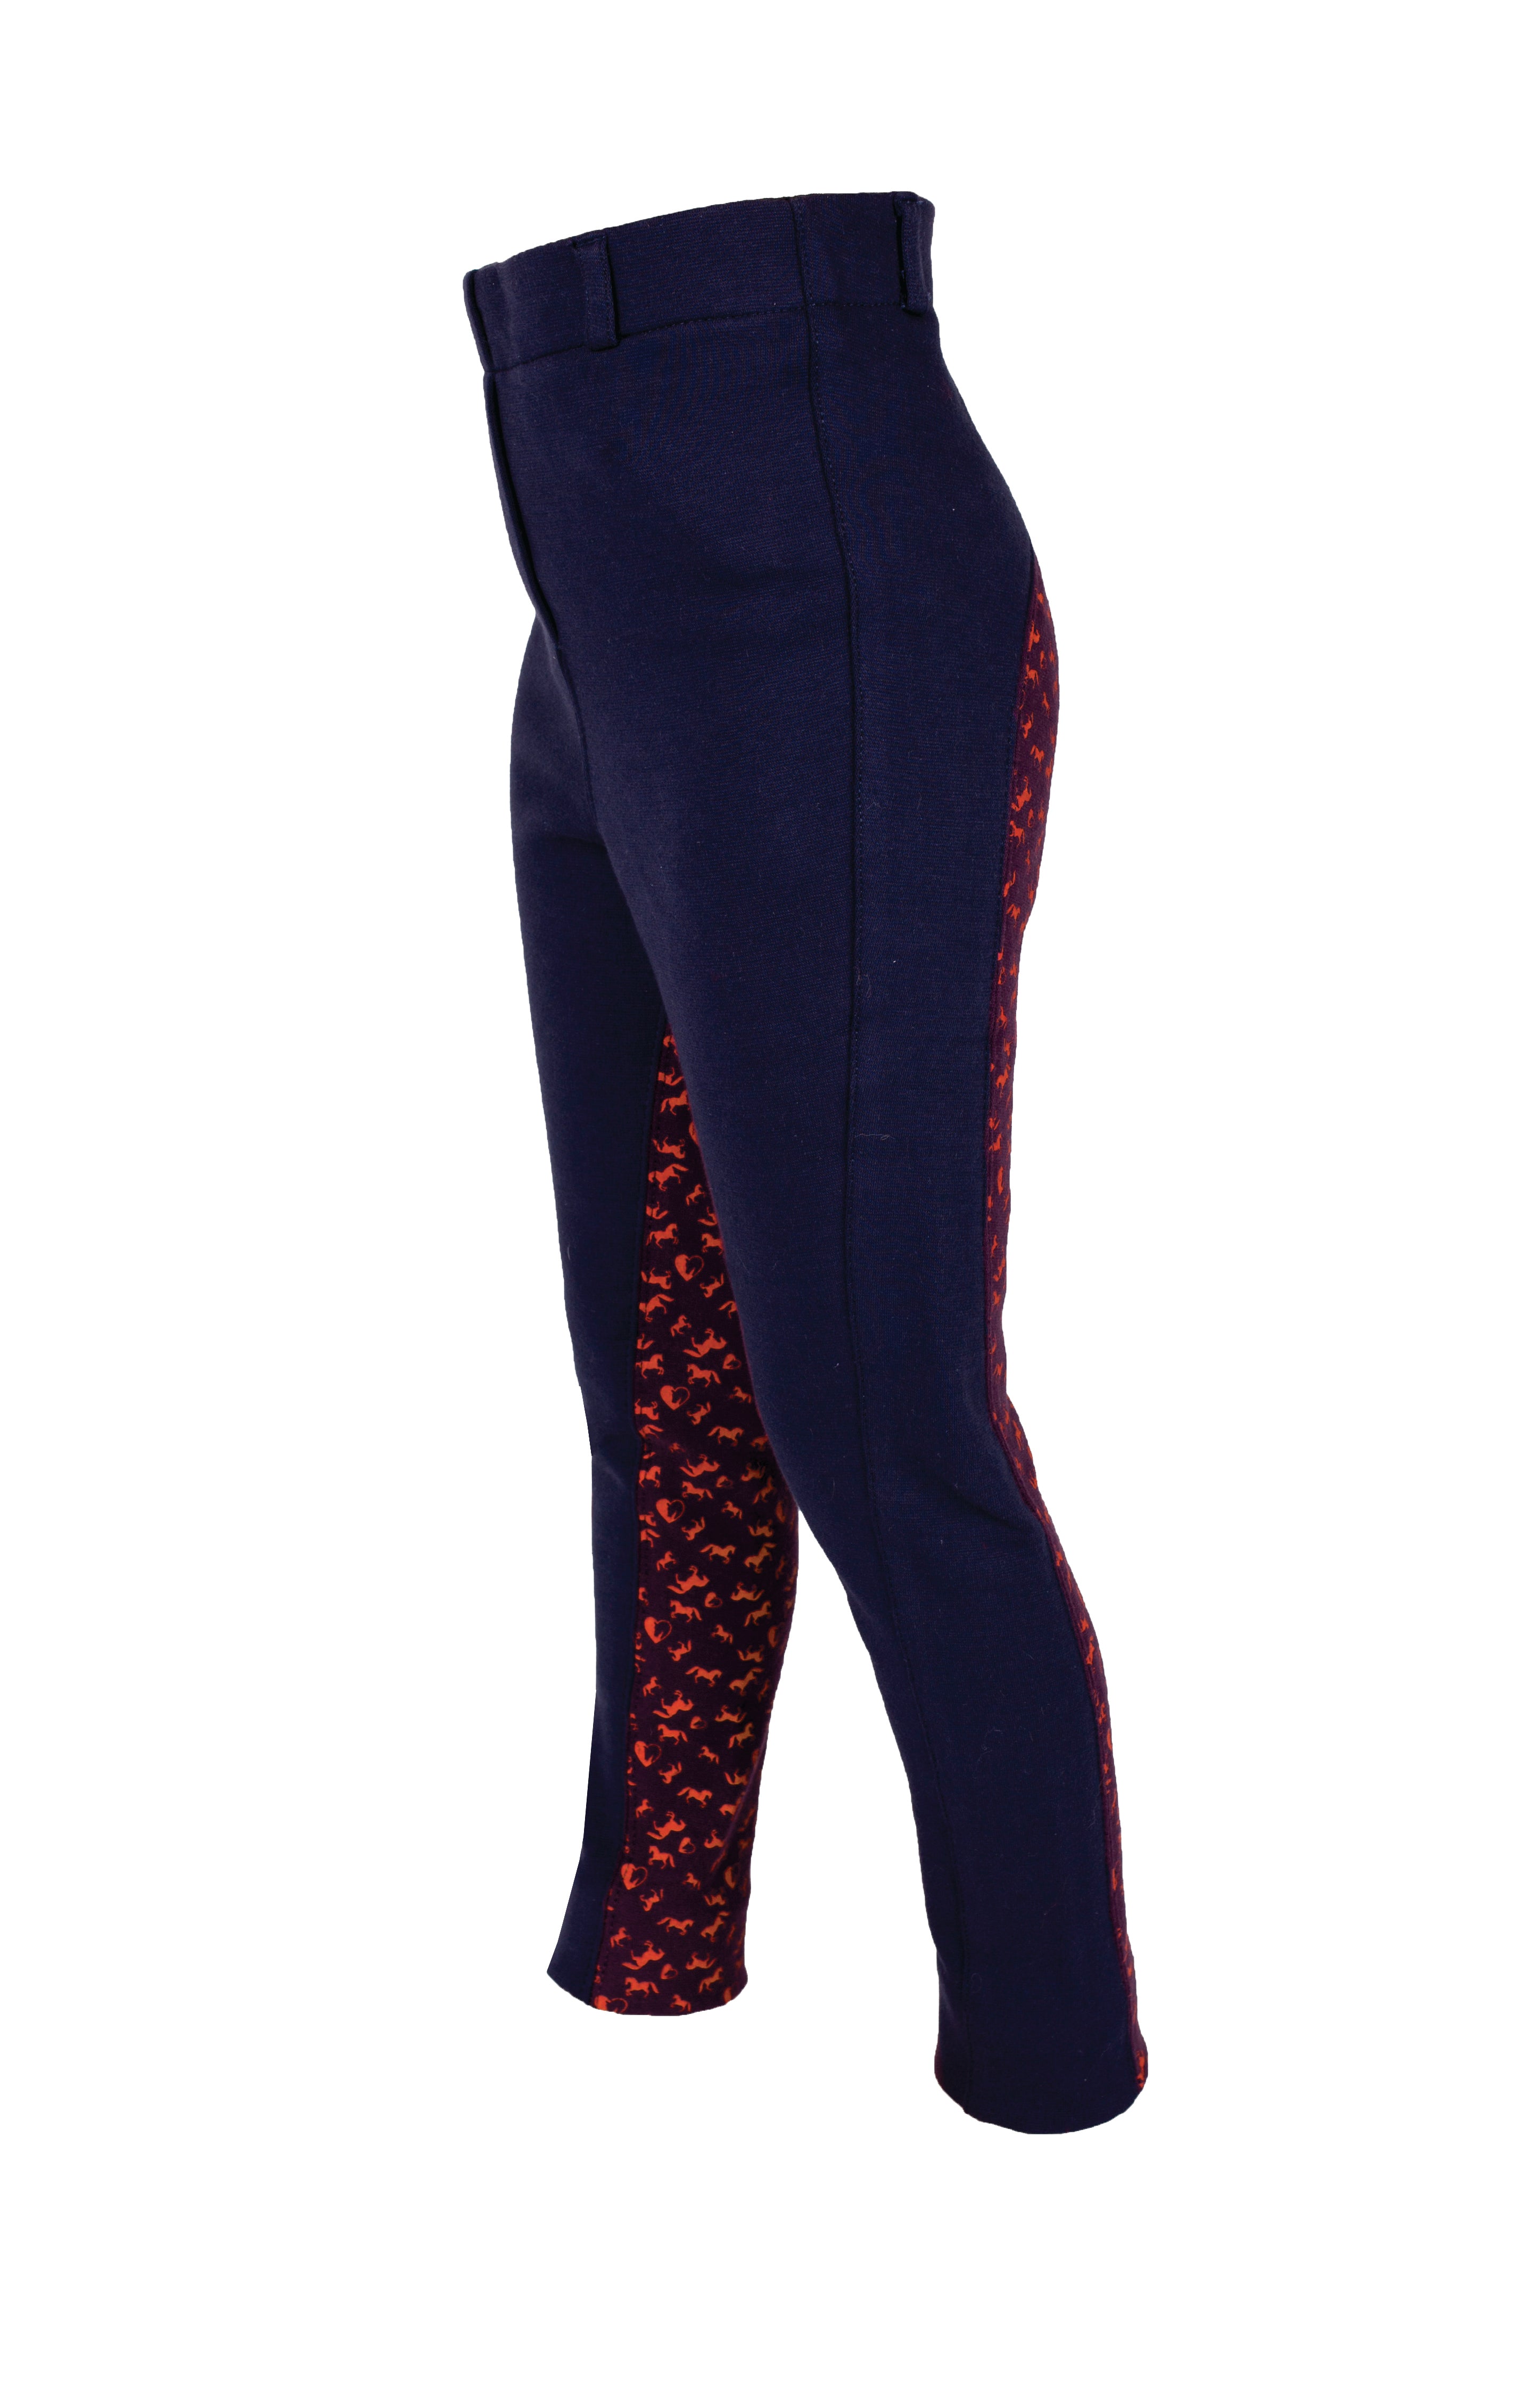 5 Reasons You Will Love these Horseware Riding Tights